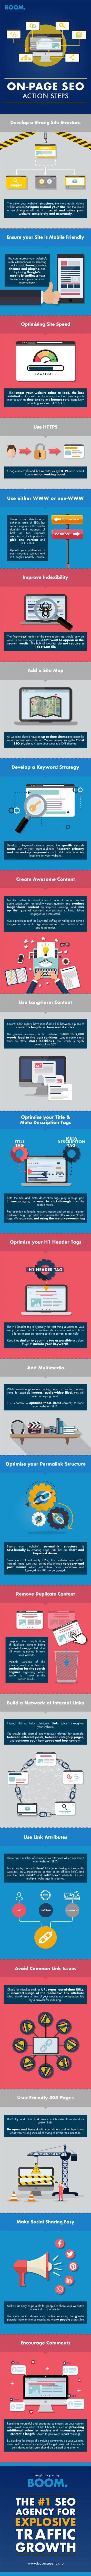 On Page SEO tips infographic